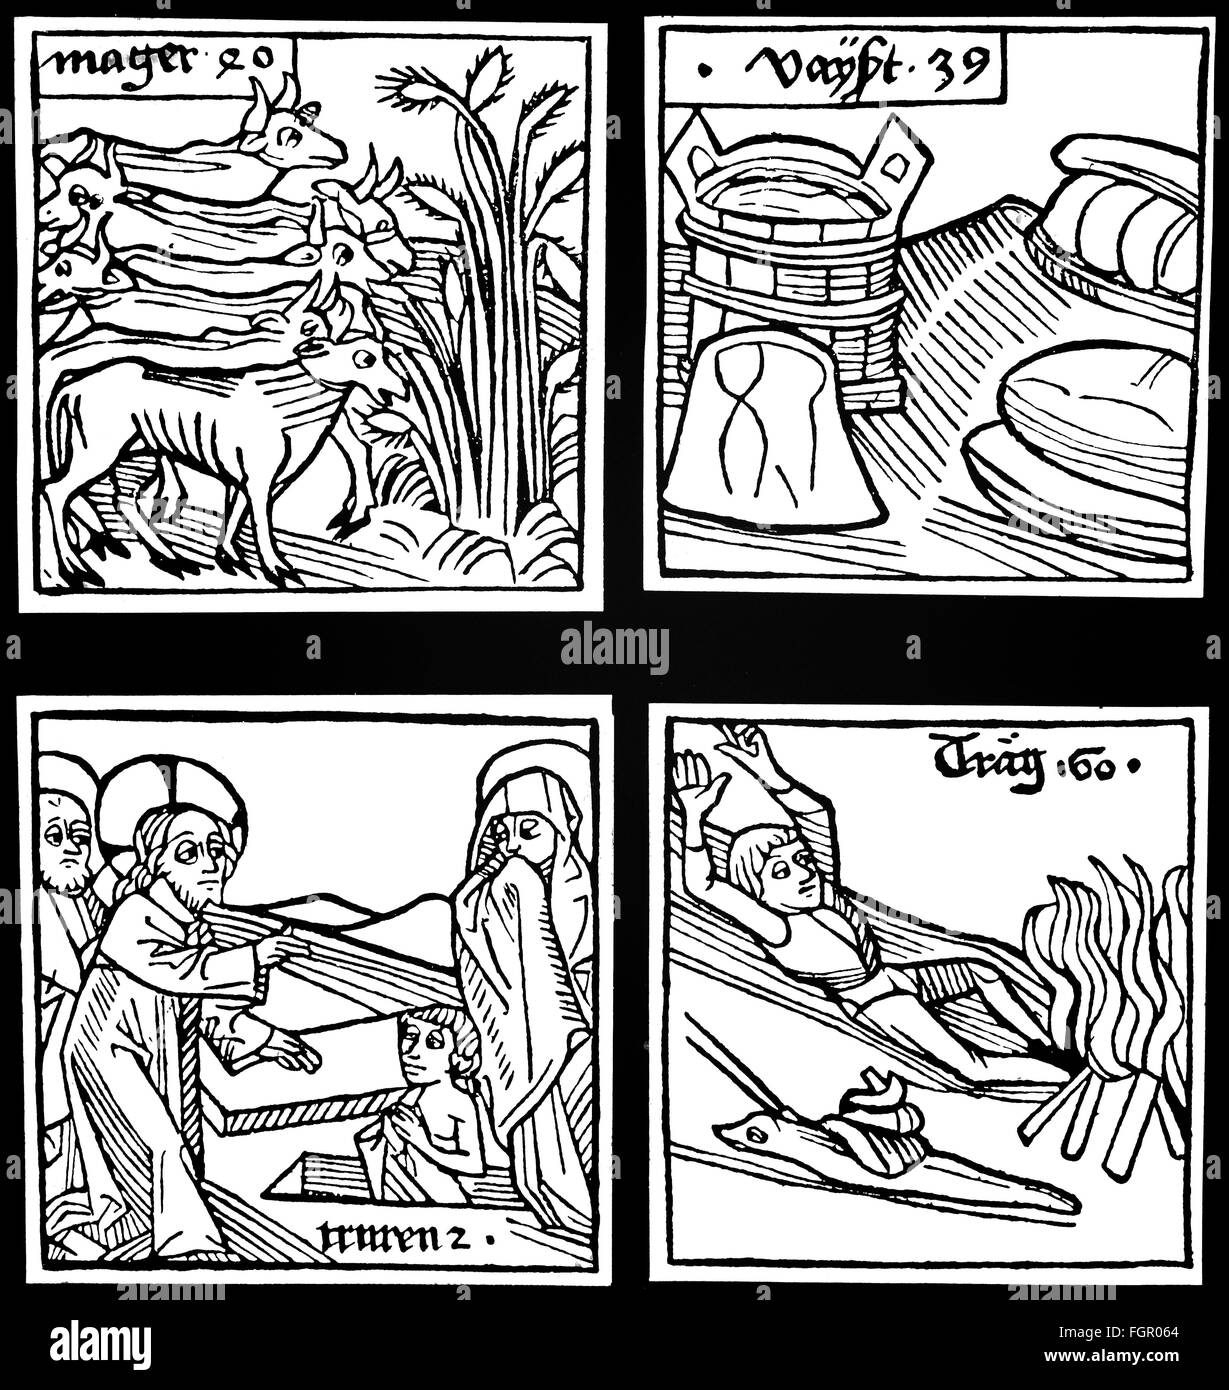 literature, Middle Ages, allegories of 'meager', 'fat', 'mourning', 'idleness', woodcut, from: 'Ars memorativa' by Jakobus Publicius, printed by Anton Sorg (1430 - 1493), Augsburg, Germany, circa 1490, private collection, Additional-Rights-Clearences-Not Available Stock Photo